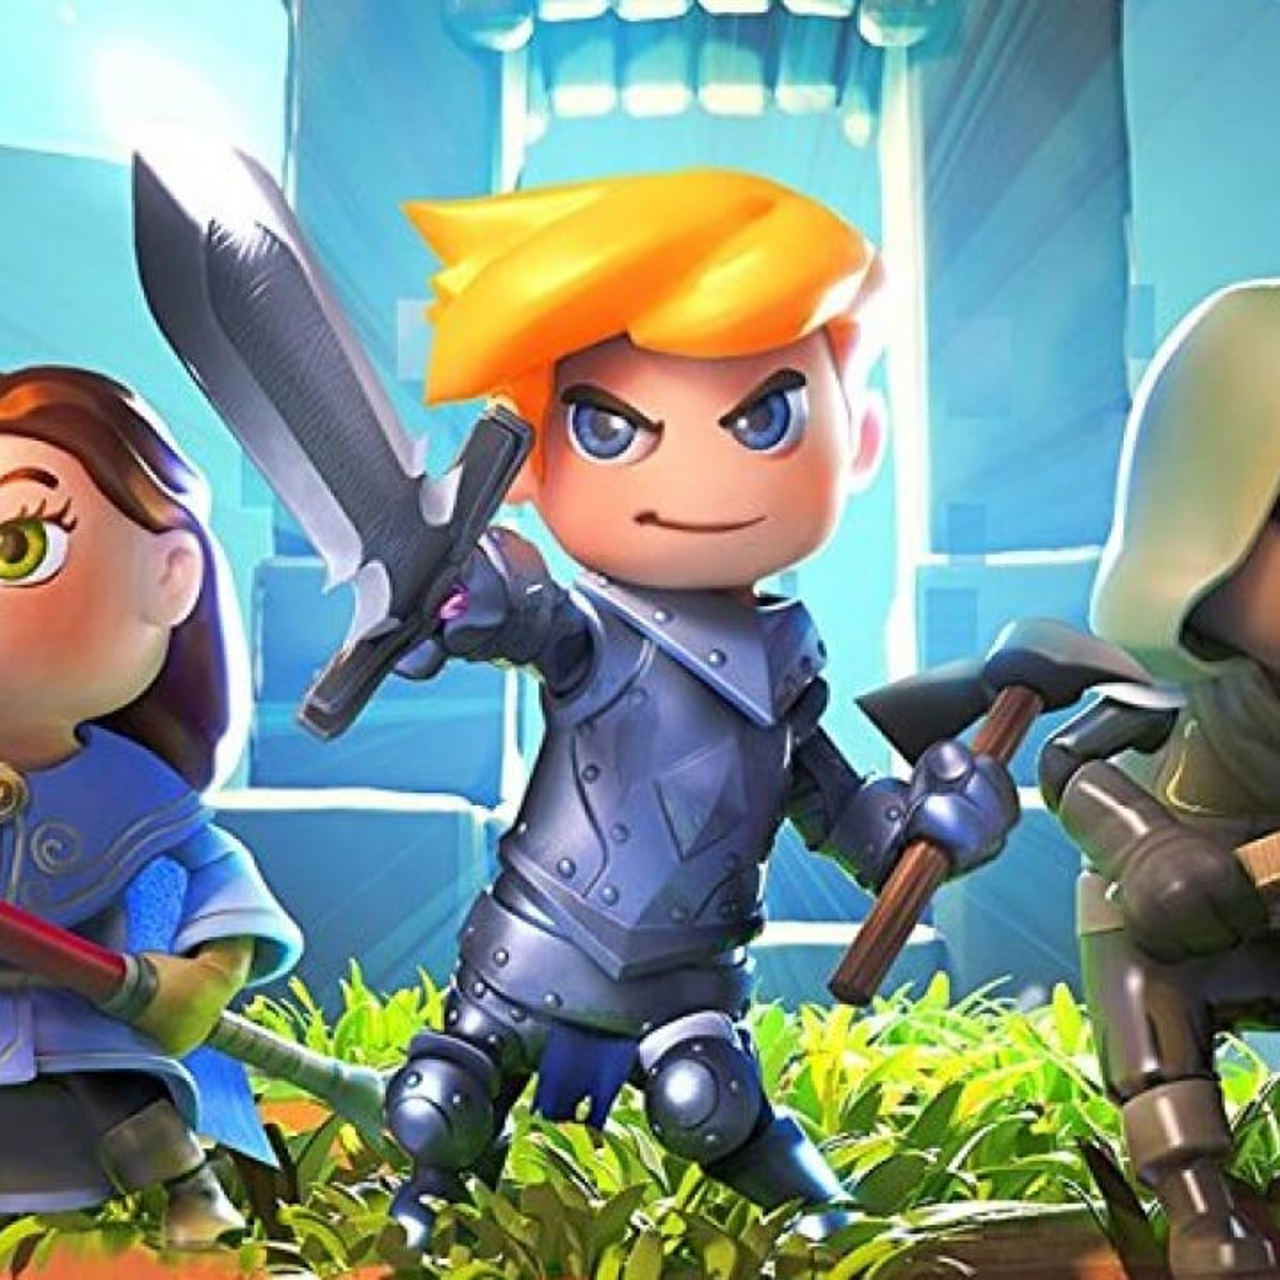 Portal Knights Key Art showing three characters holding weapons